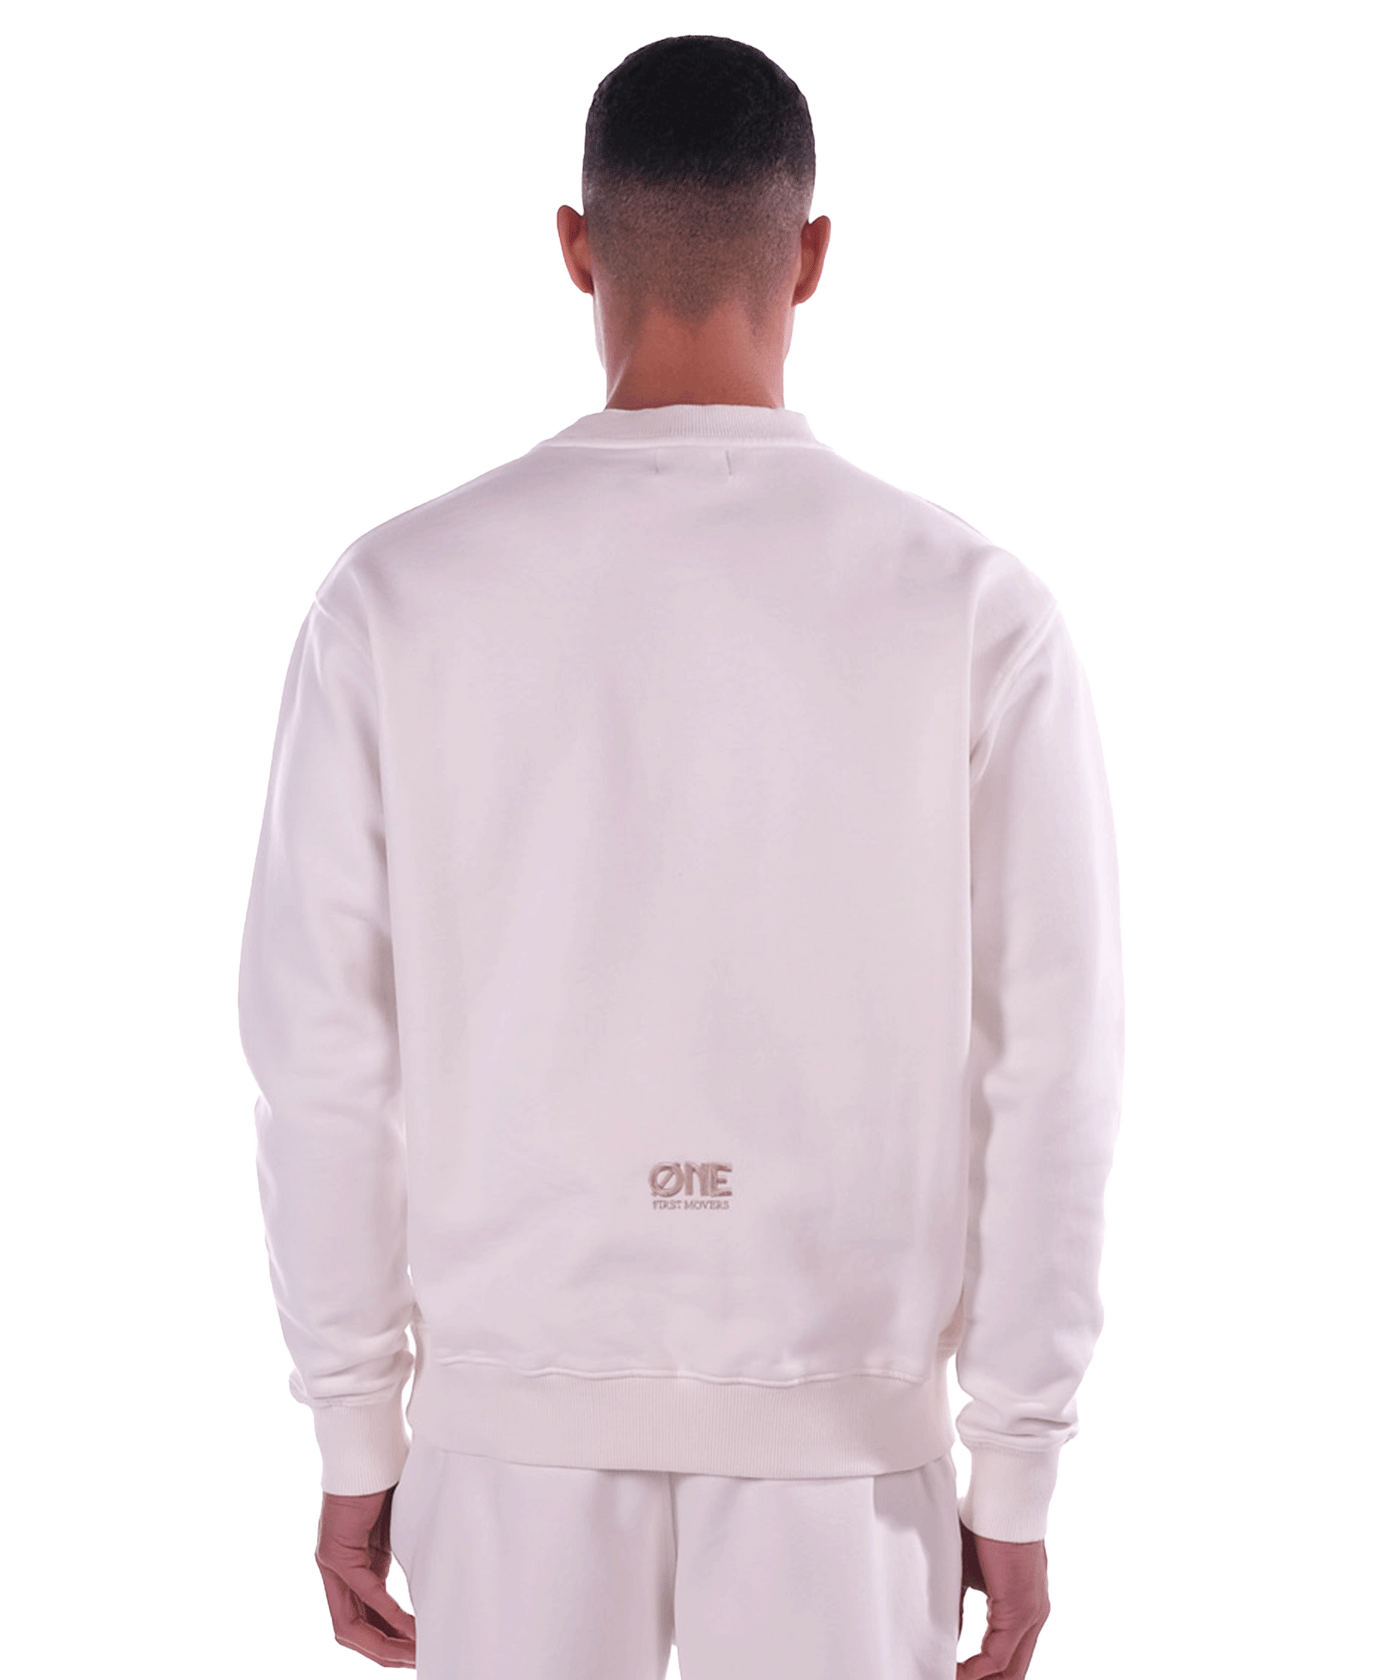 One First Movers - Embroidery Logo - Crewneck - Off White